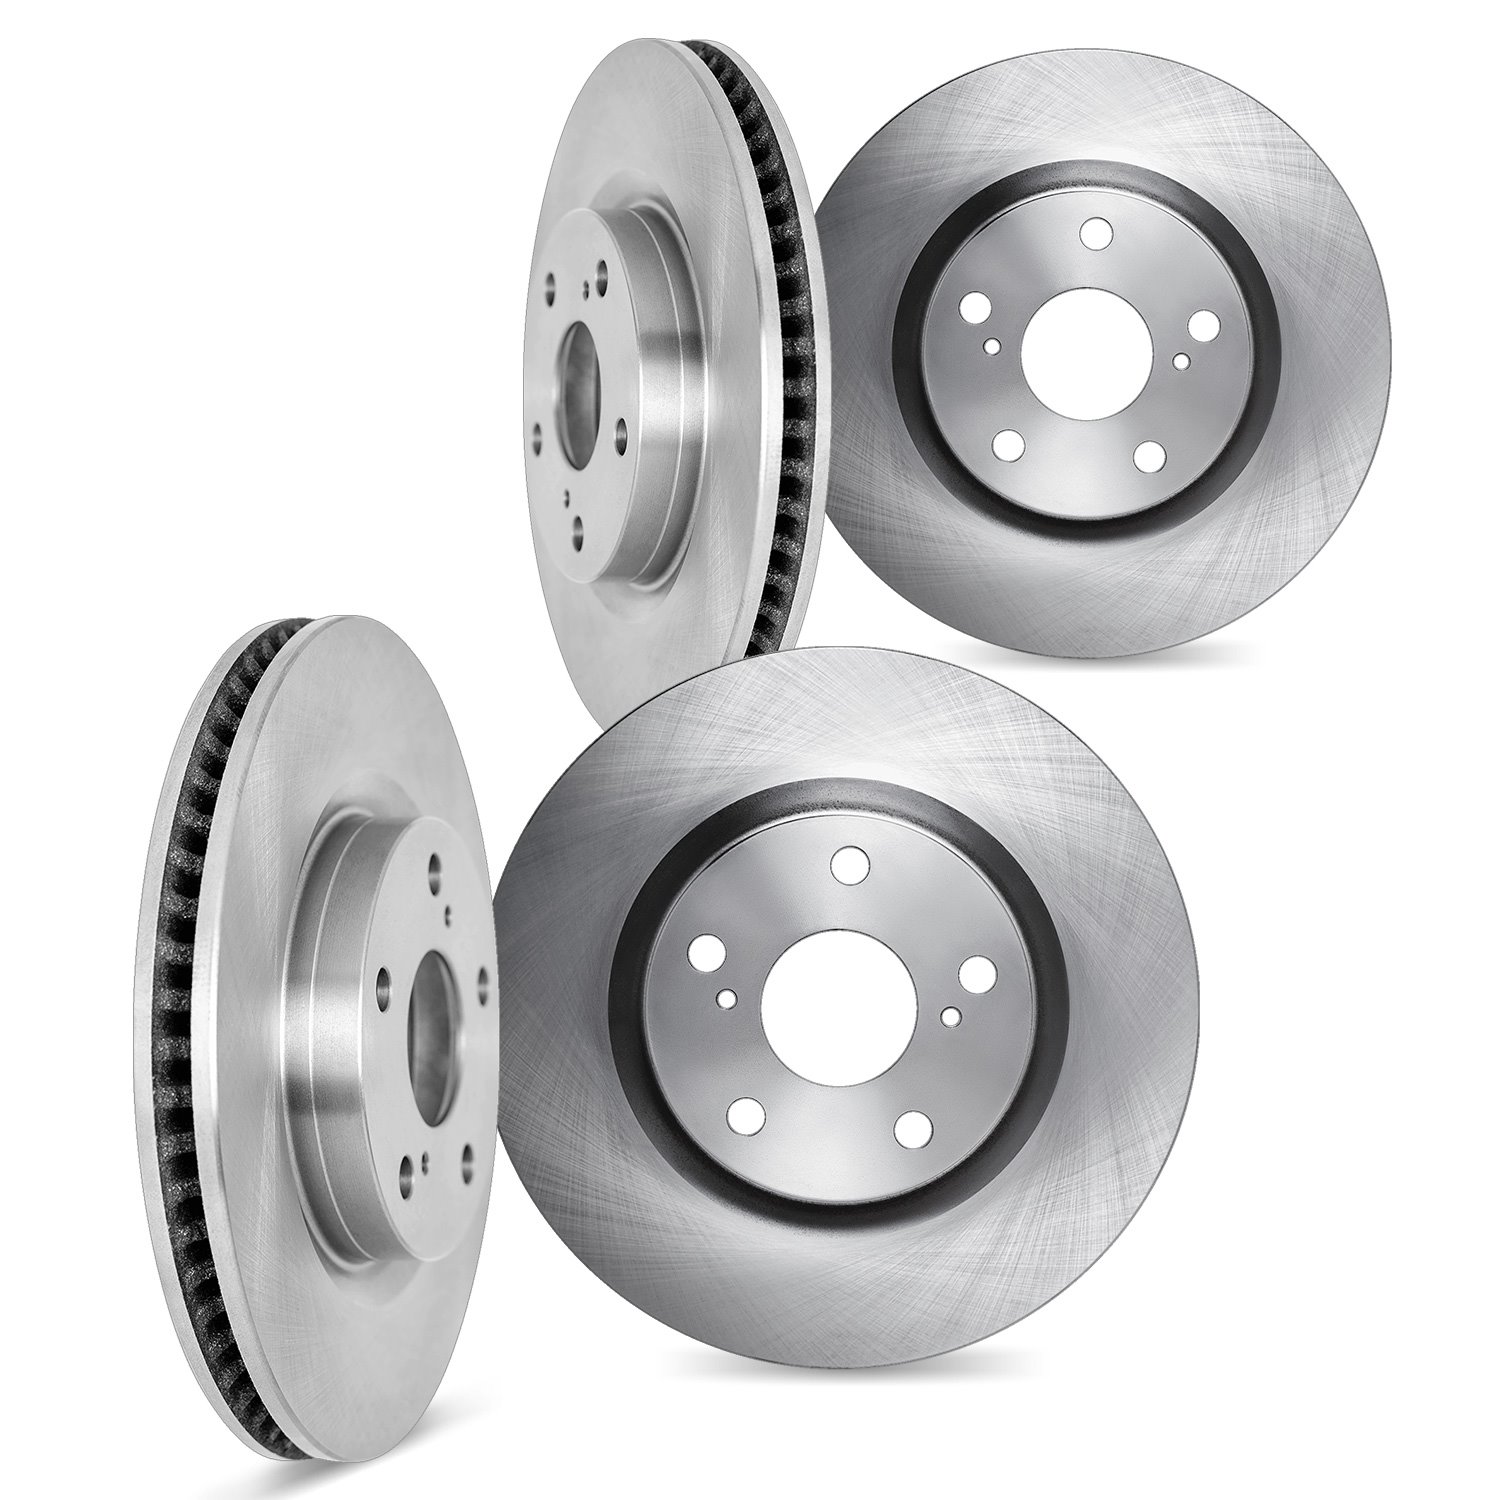 6004-11023 Brake Rotors, Fits Select Multiple Makes/Models, Position: Front and Rear